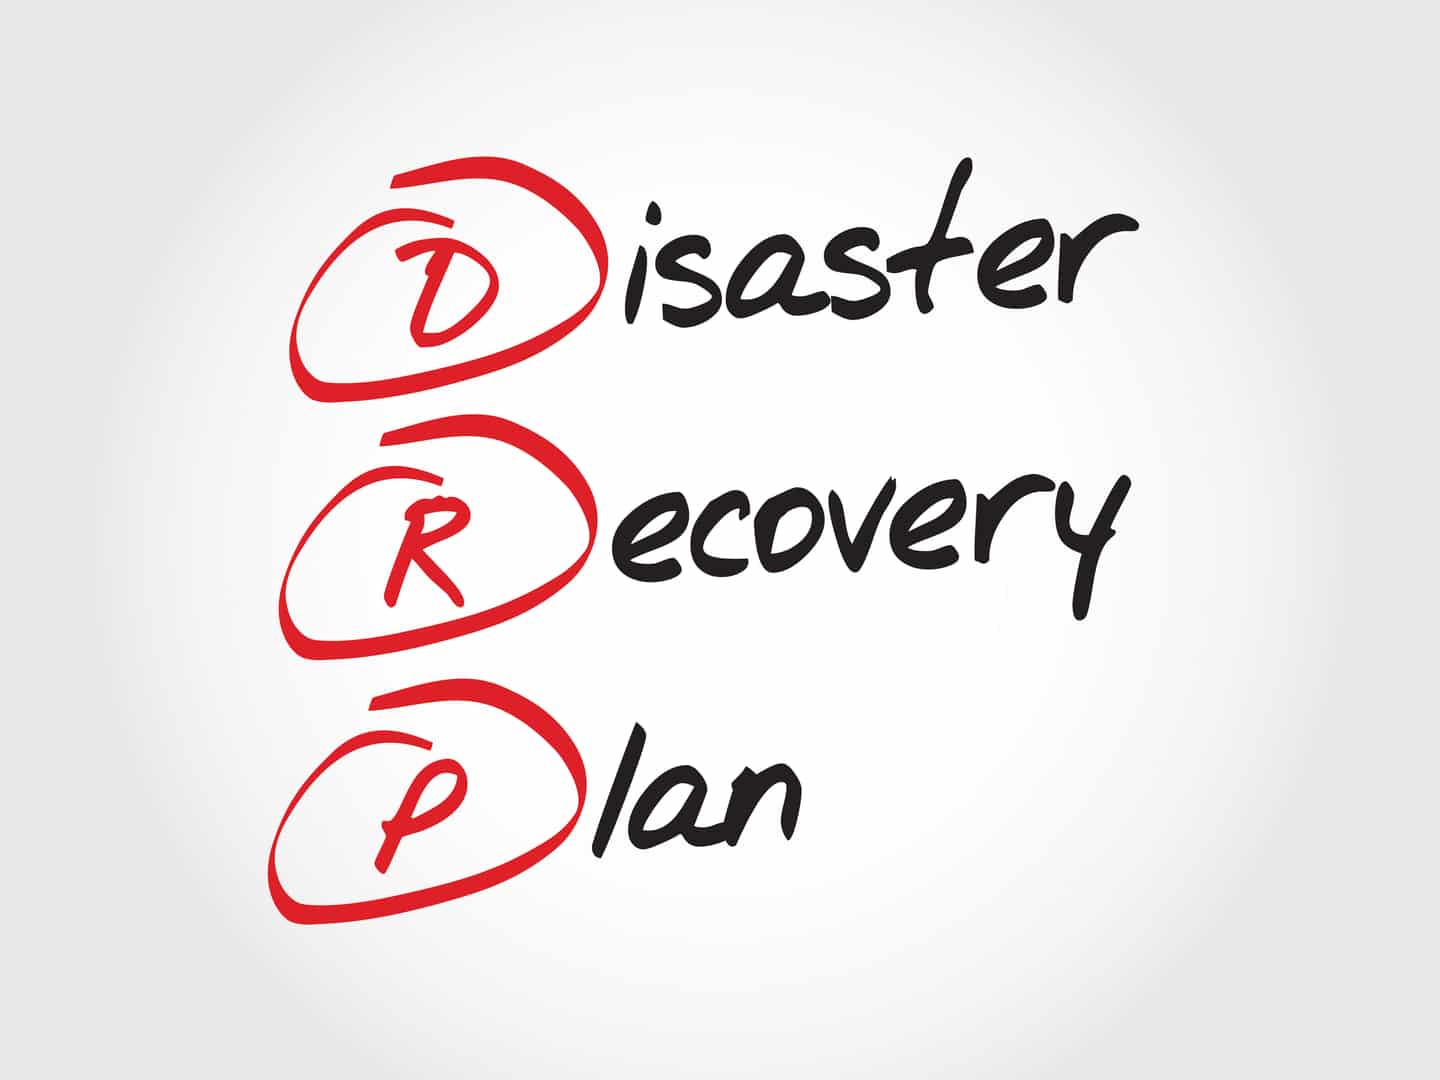 Do You Have a Business Disaster Plan?